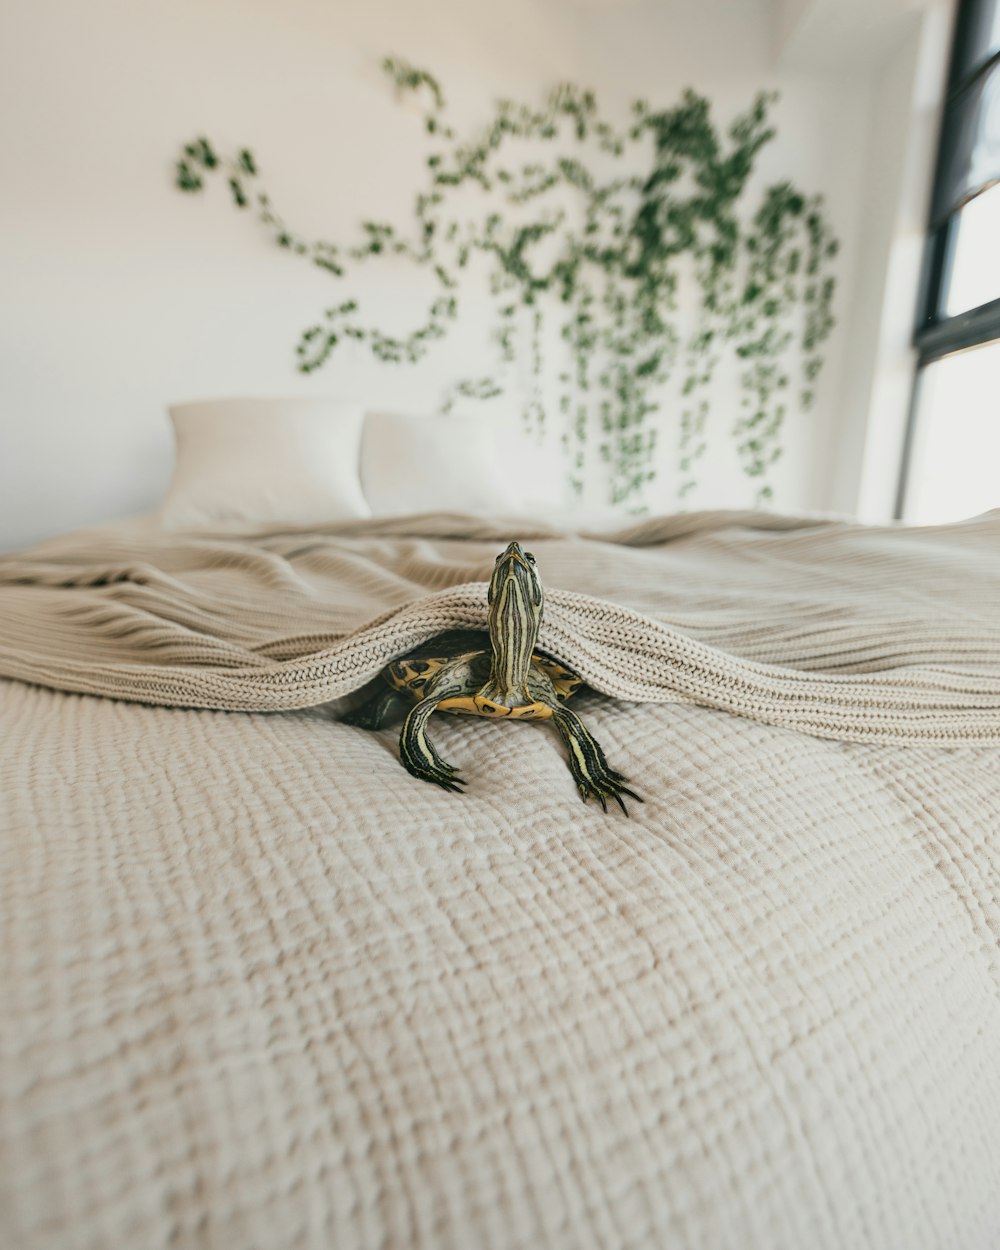 gold and black dragon figurine on white bed